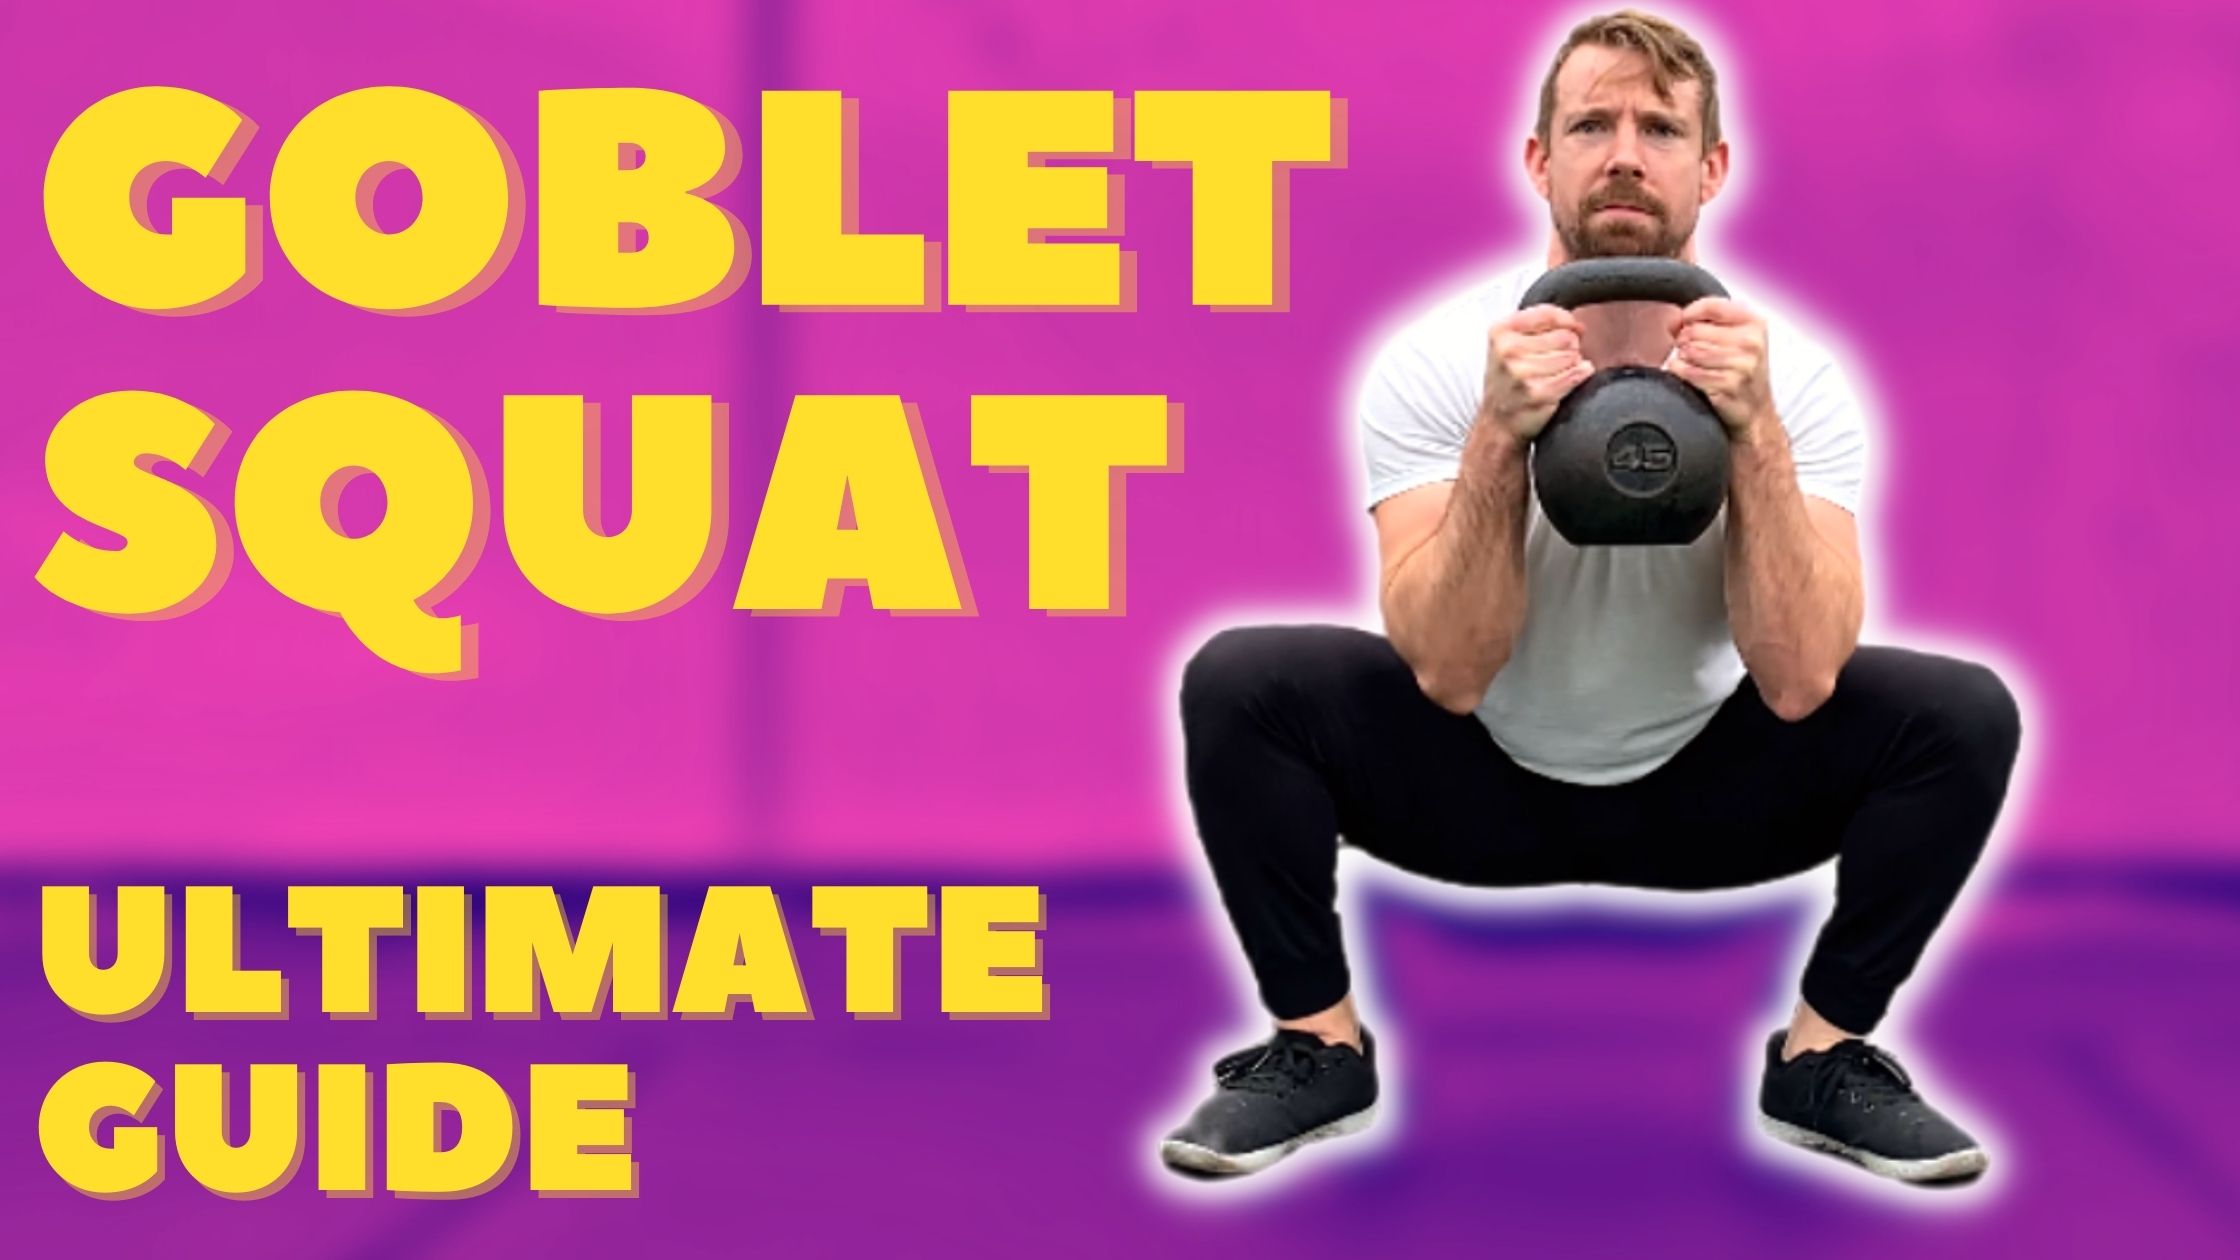 The Ultimate Guide to the Goblet Squat